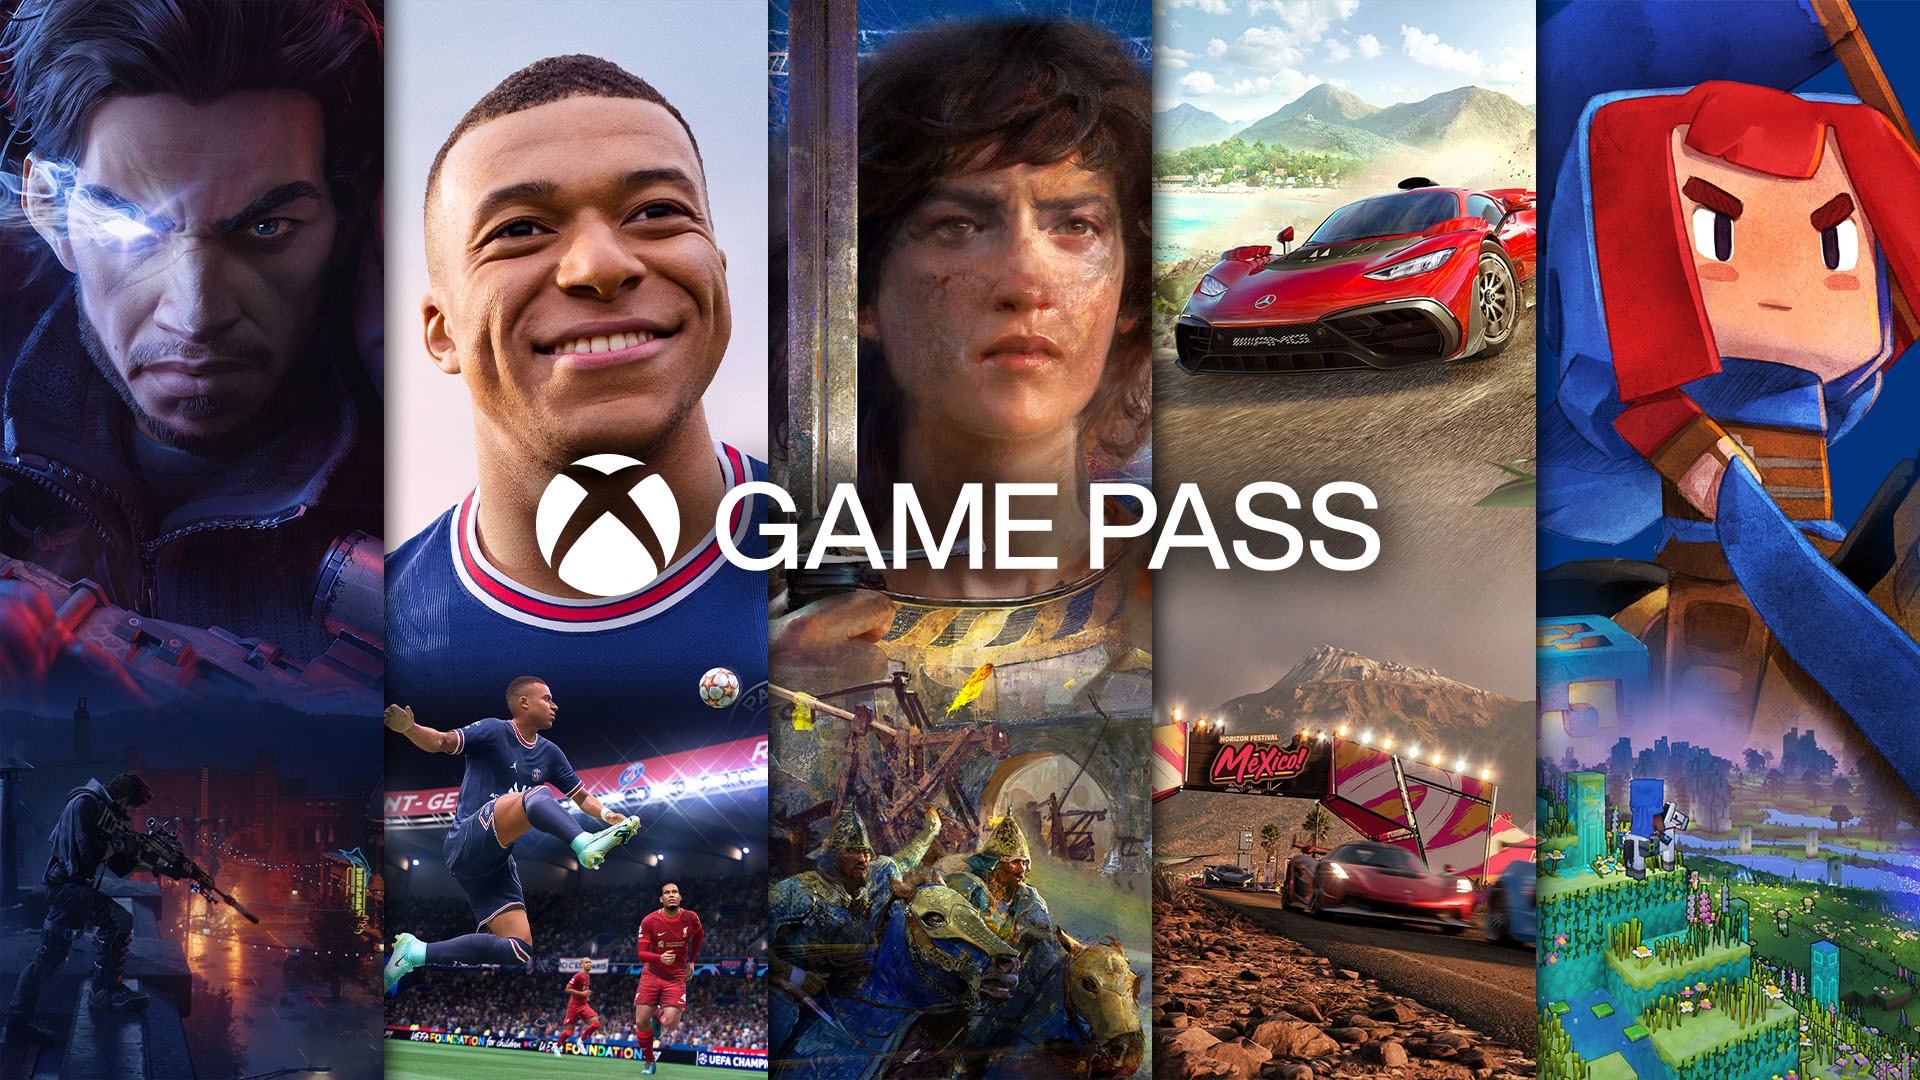 Microsoft Wants Xbox Game Pass on PlayStation and Nintendo